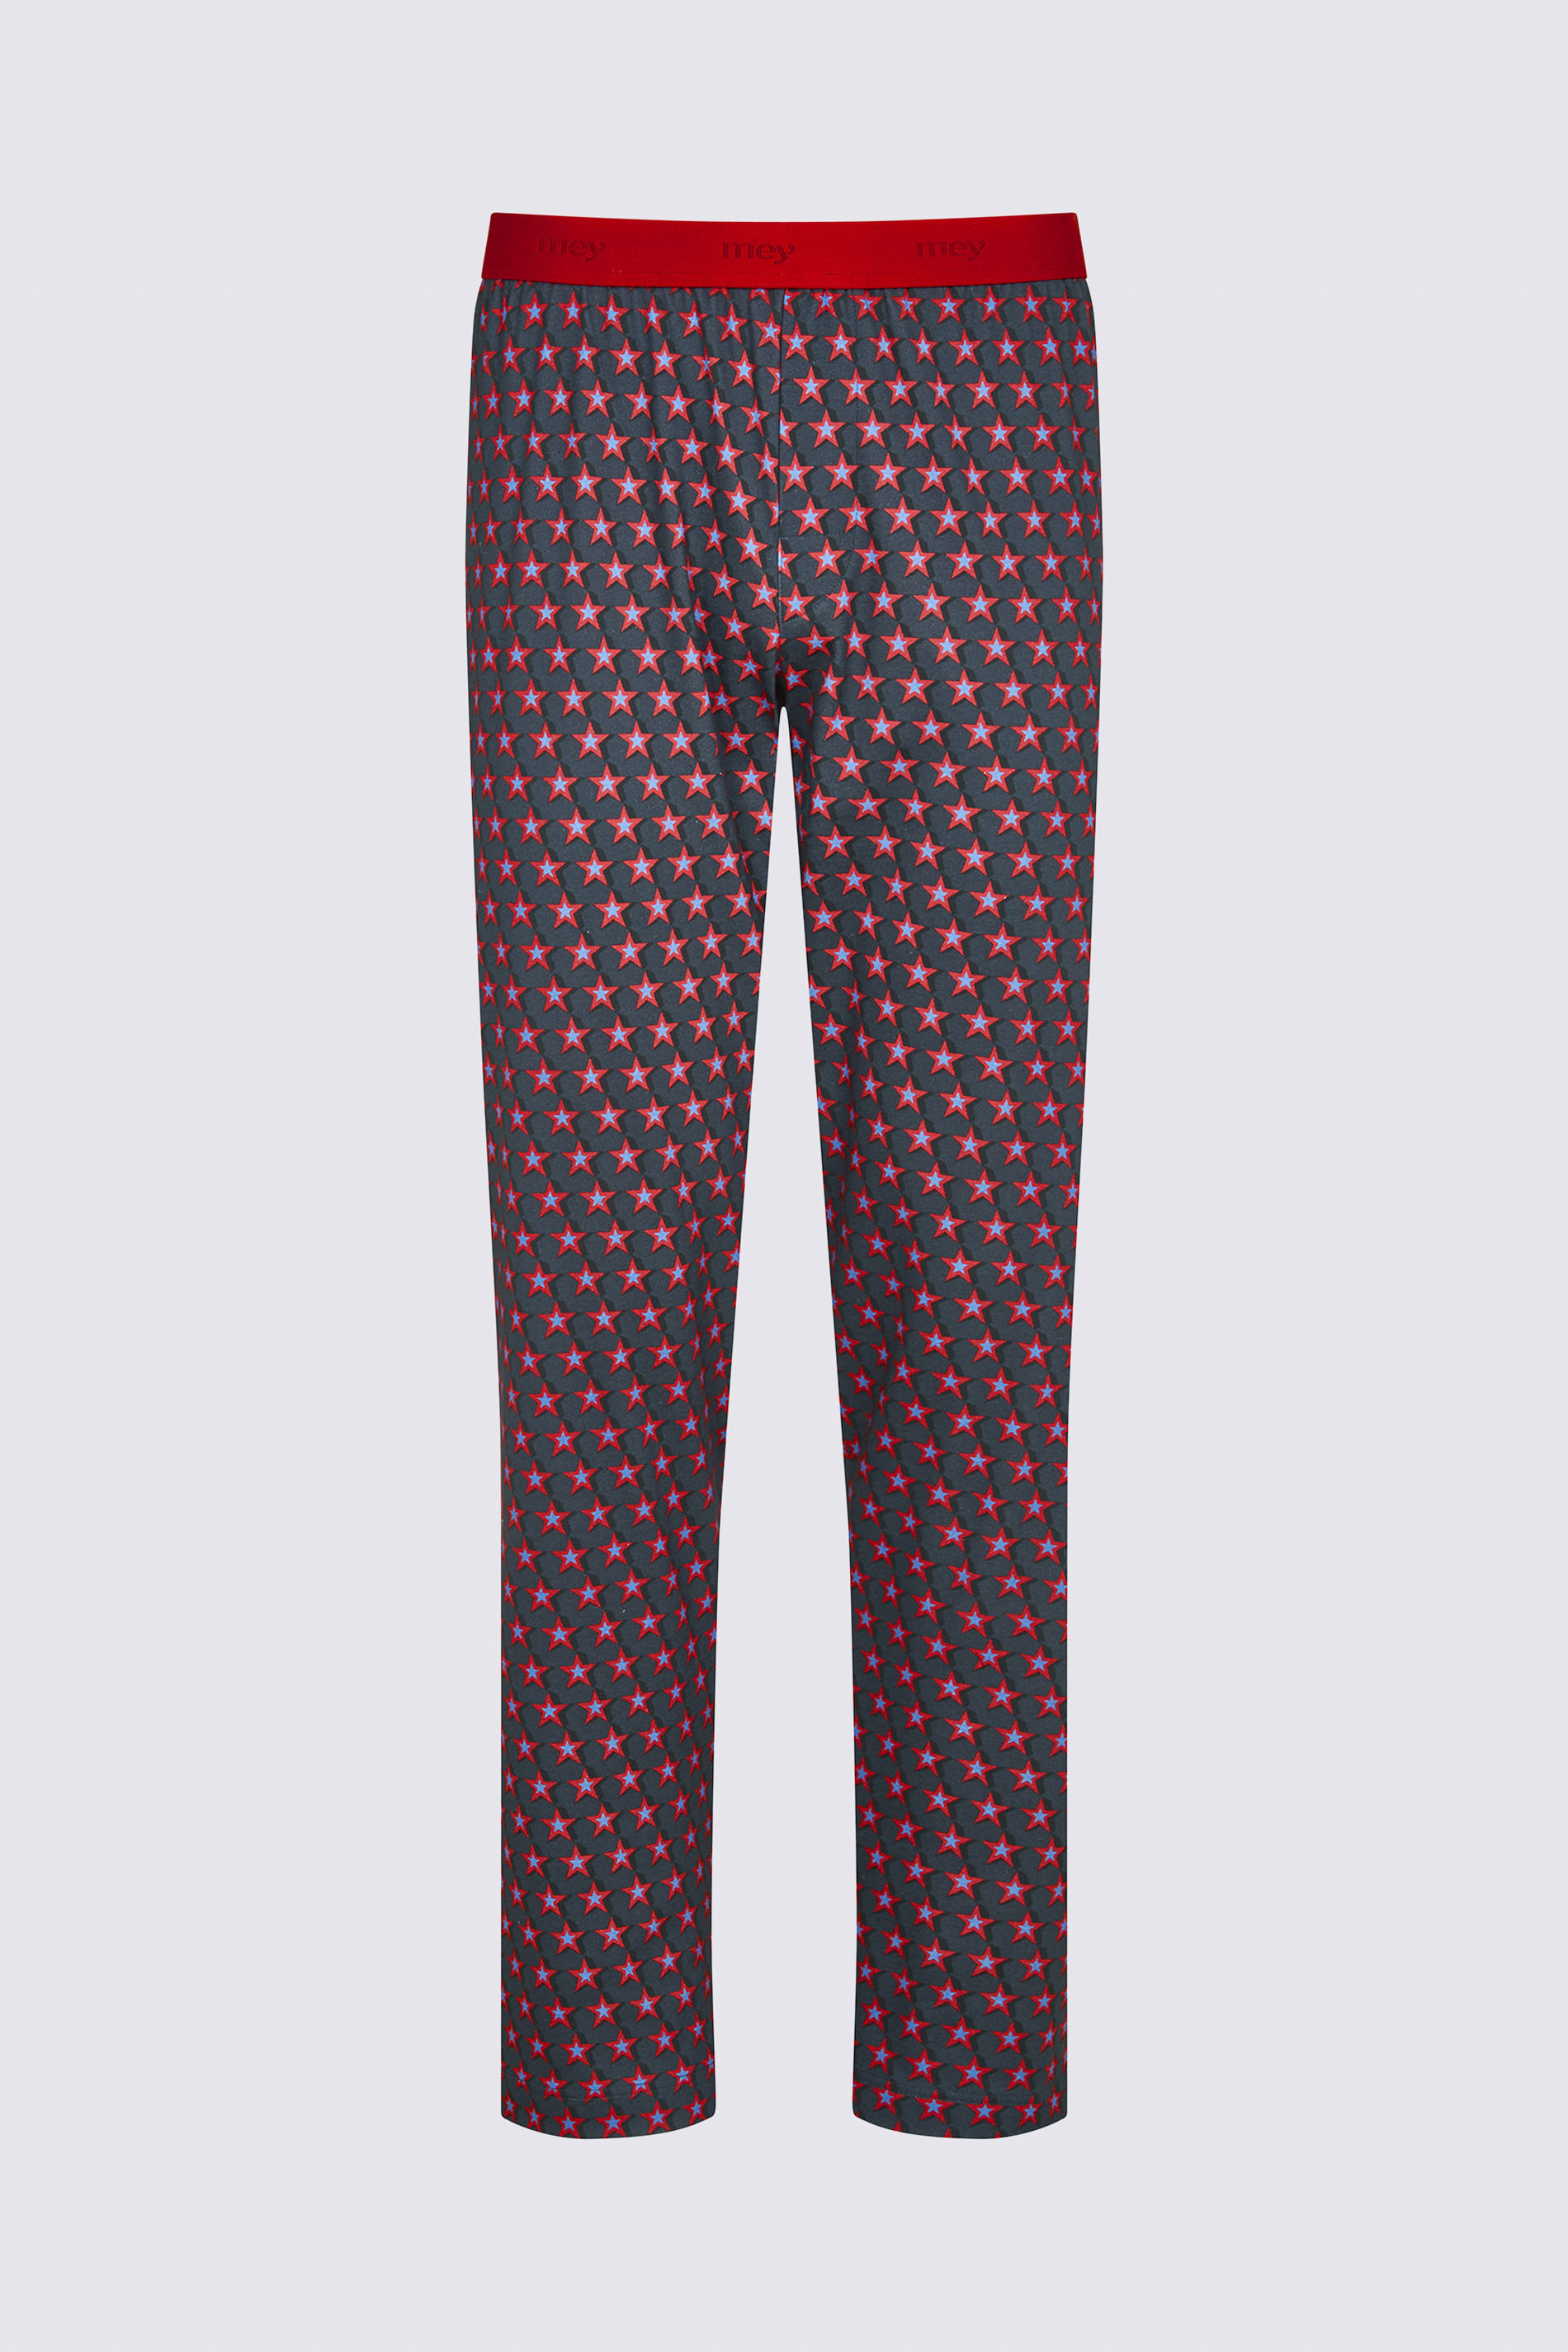 Long-pants Fire Red Serie RE:THINK STAR Uitknippen | mey®